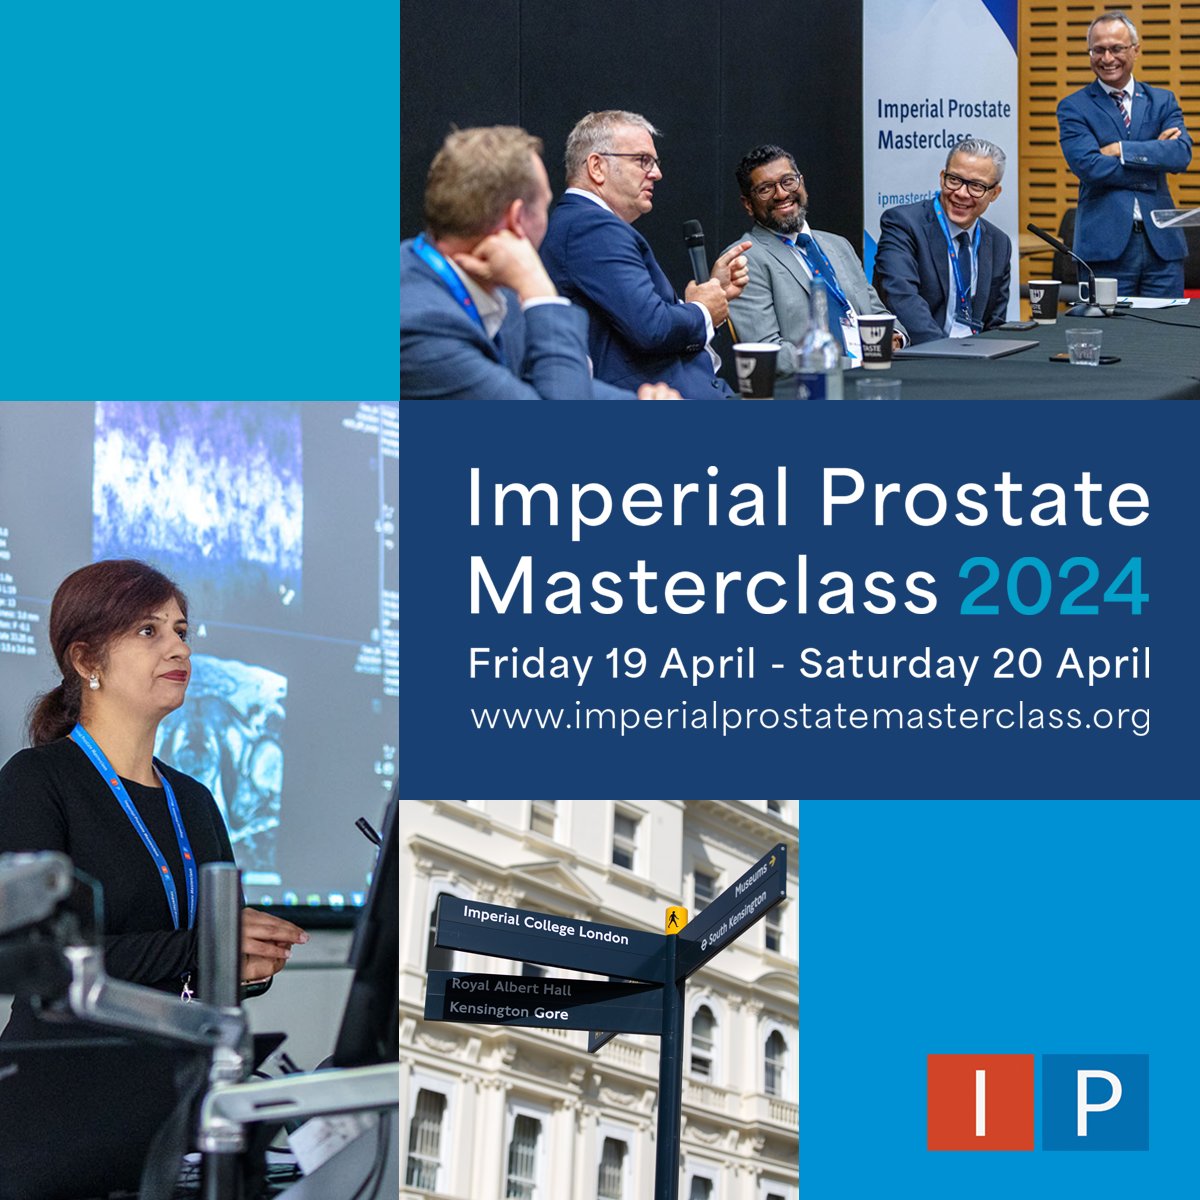 💫 Have you checked out the agenda for the #ipmasterclass24? 🚀 Join our world-leading faculty & delegates from around the globe 🌍 for two-days of podium sessions & hands-on training! 🌐 imperialprostatemasterclass.org